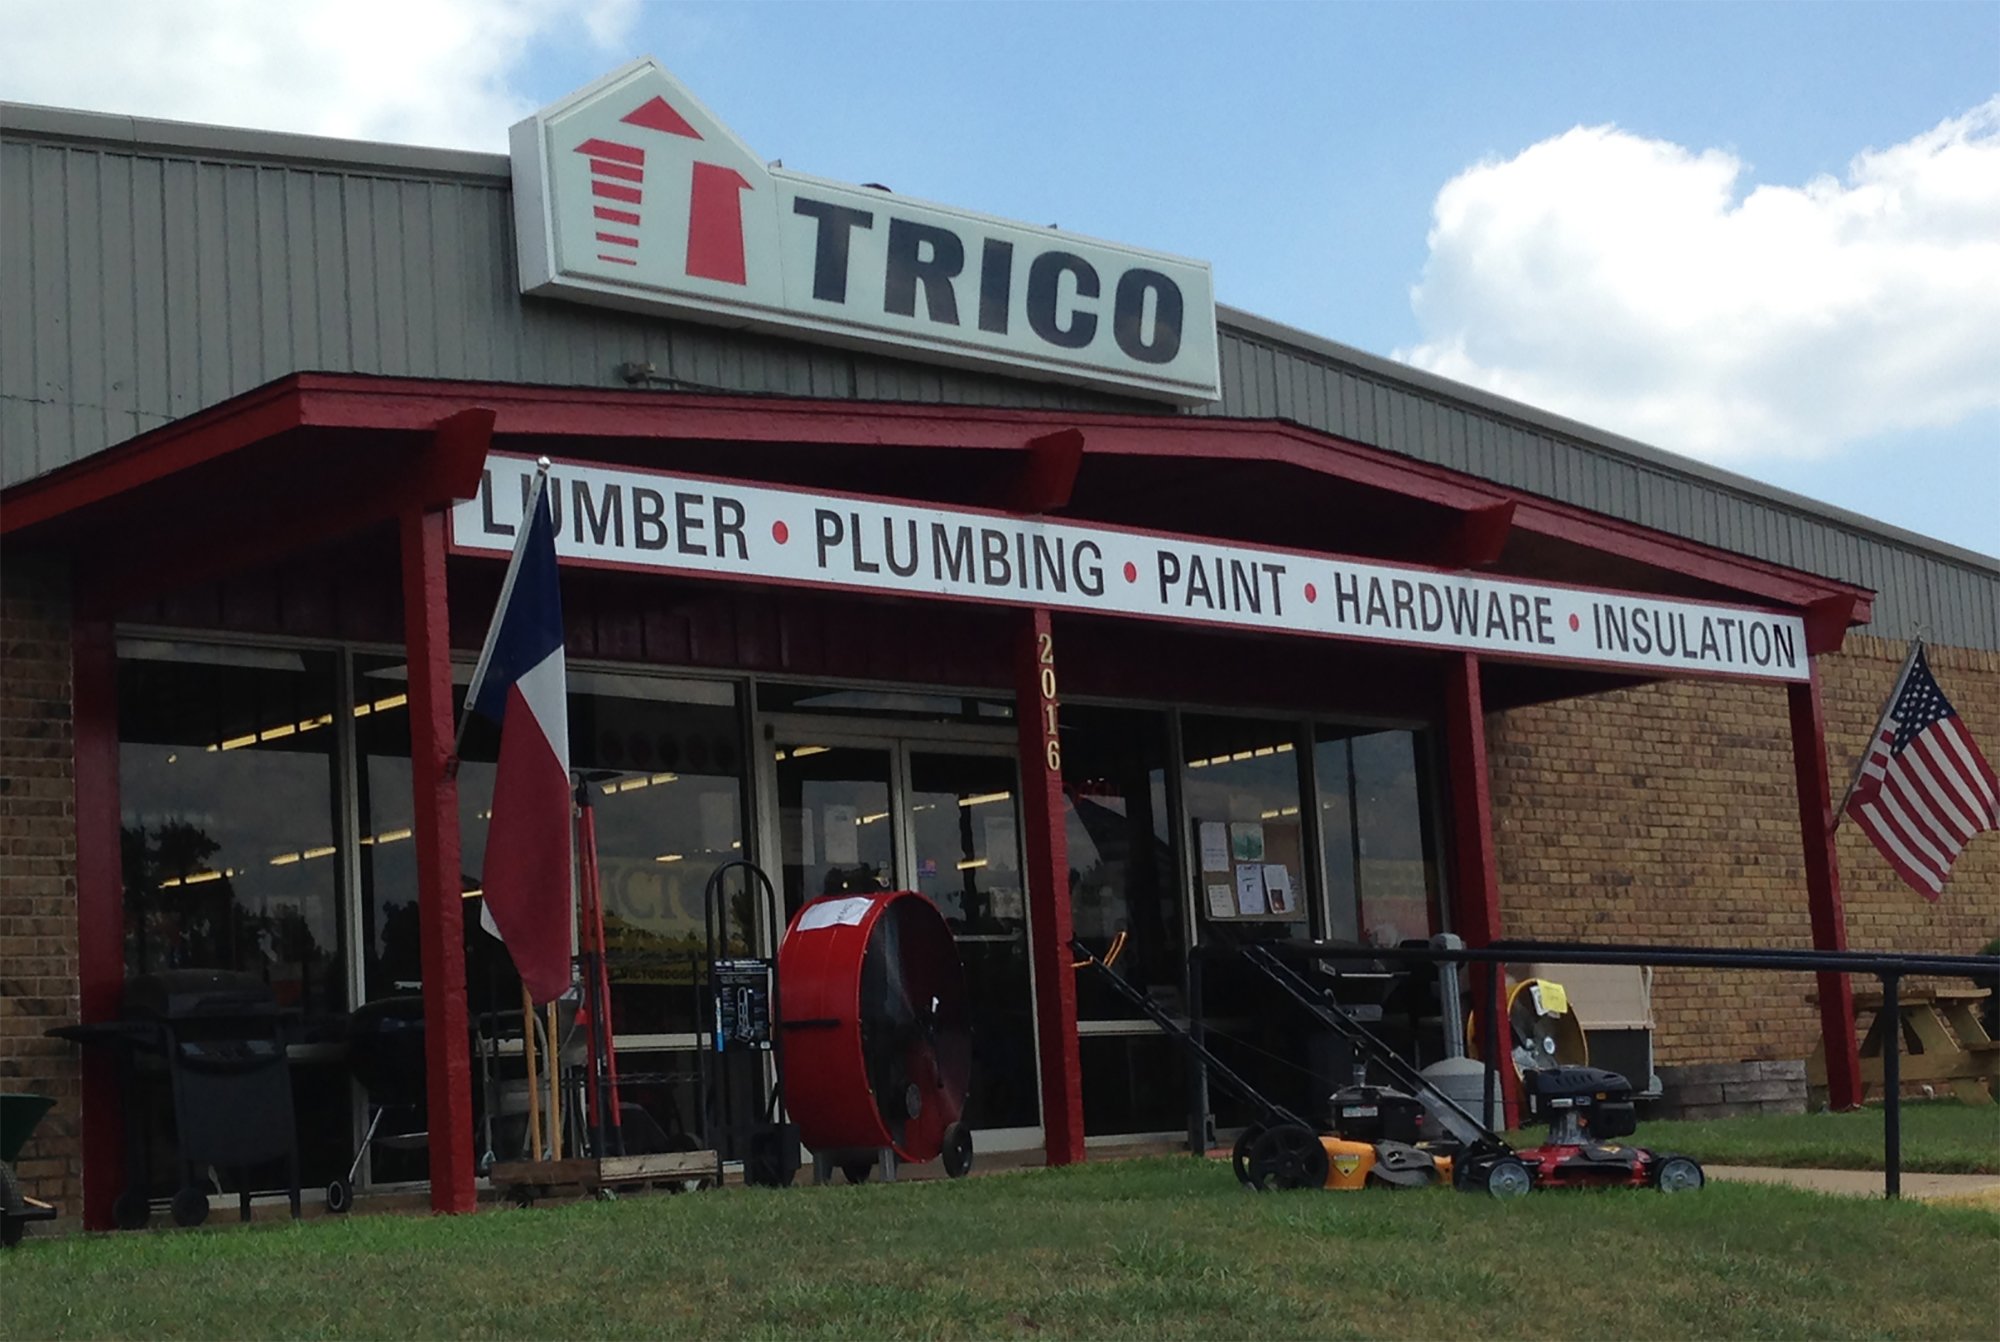 Trico Lumber Store front